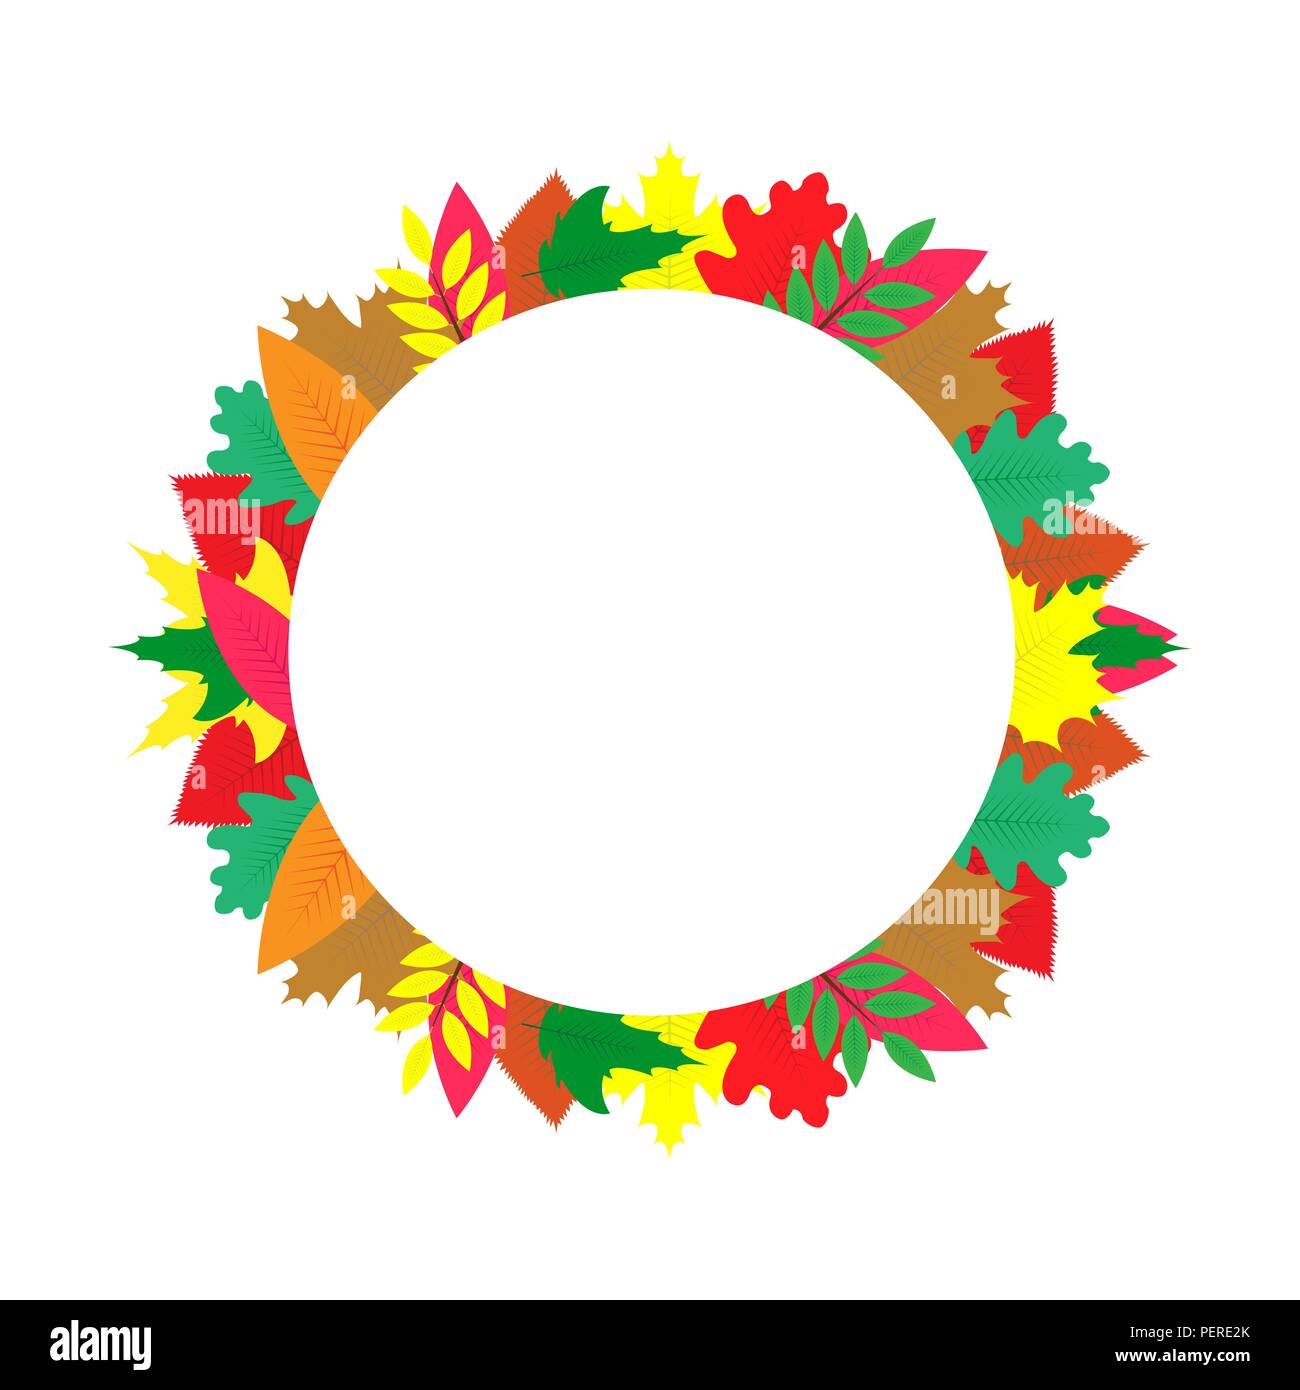 Autumn Banner With Colorful Leaves Stock Vector